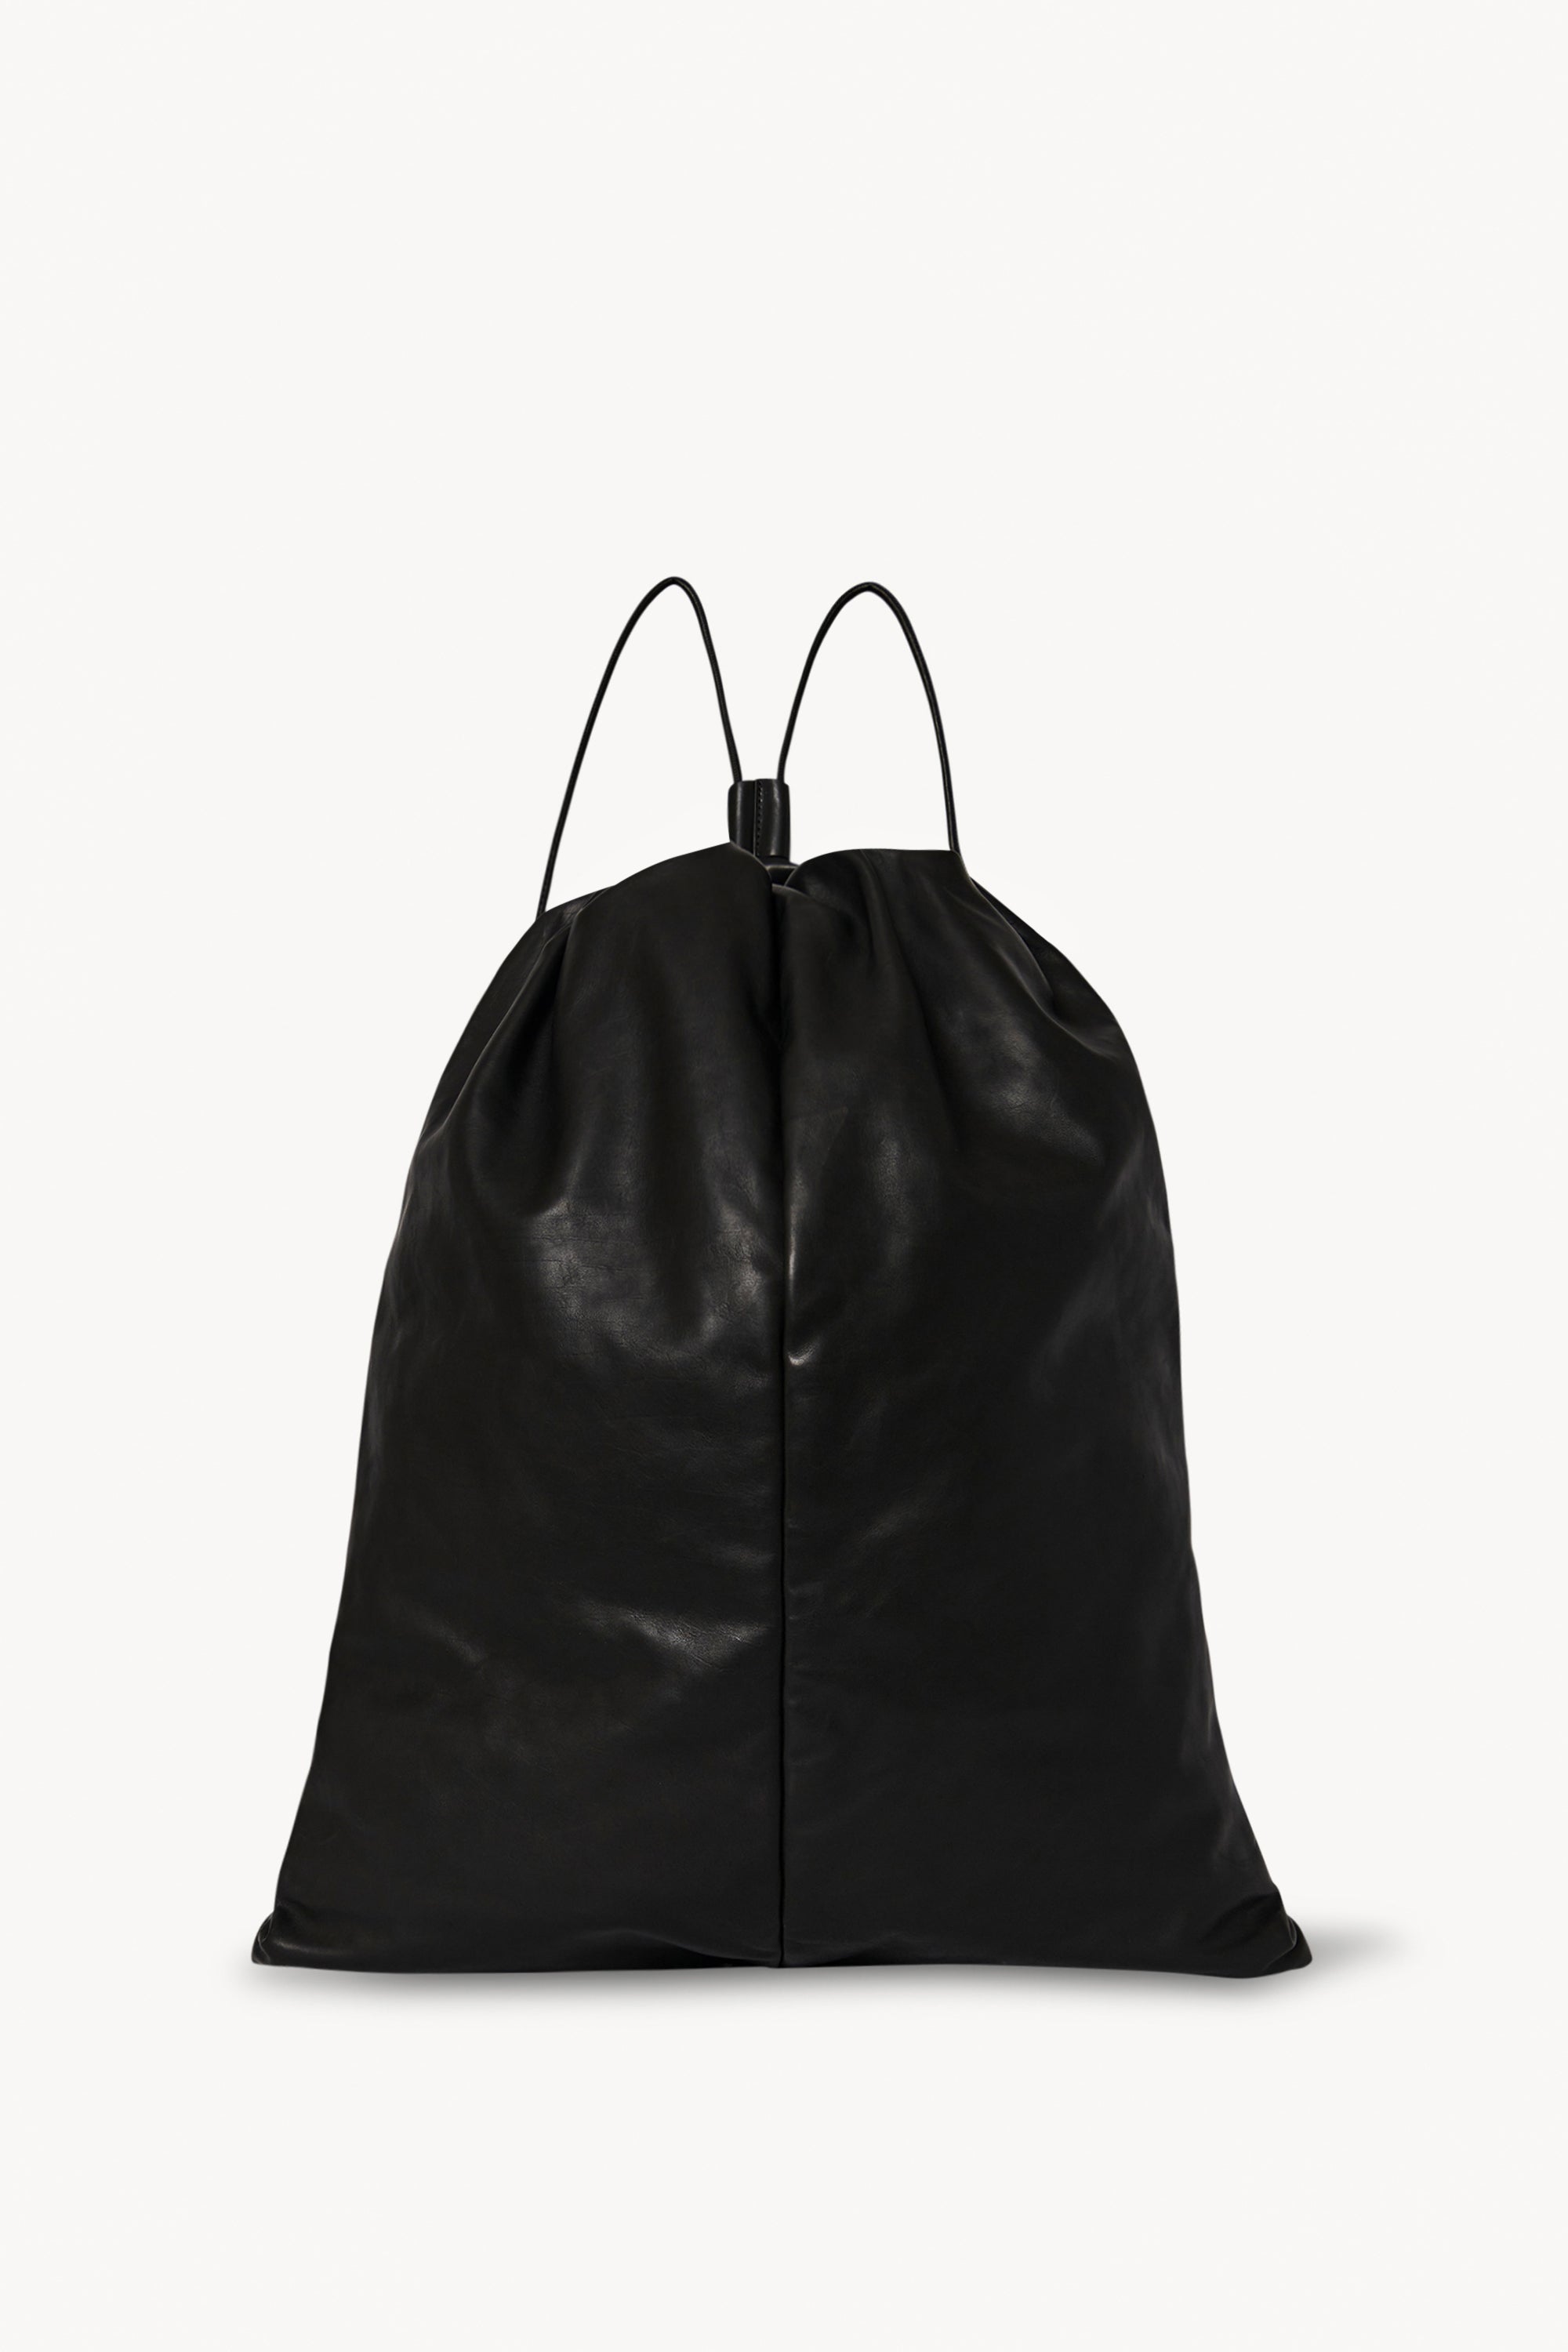 The Row - Puffy Backpack in Leather - Black - One Size